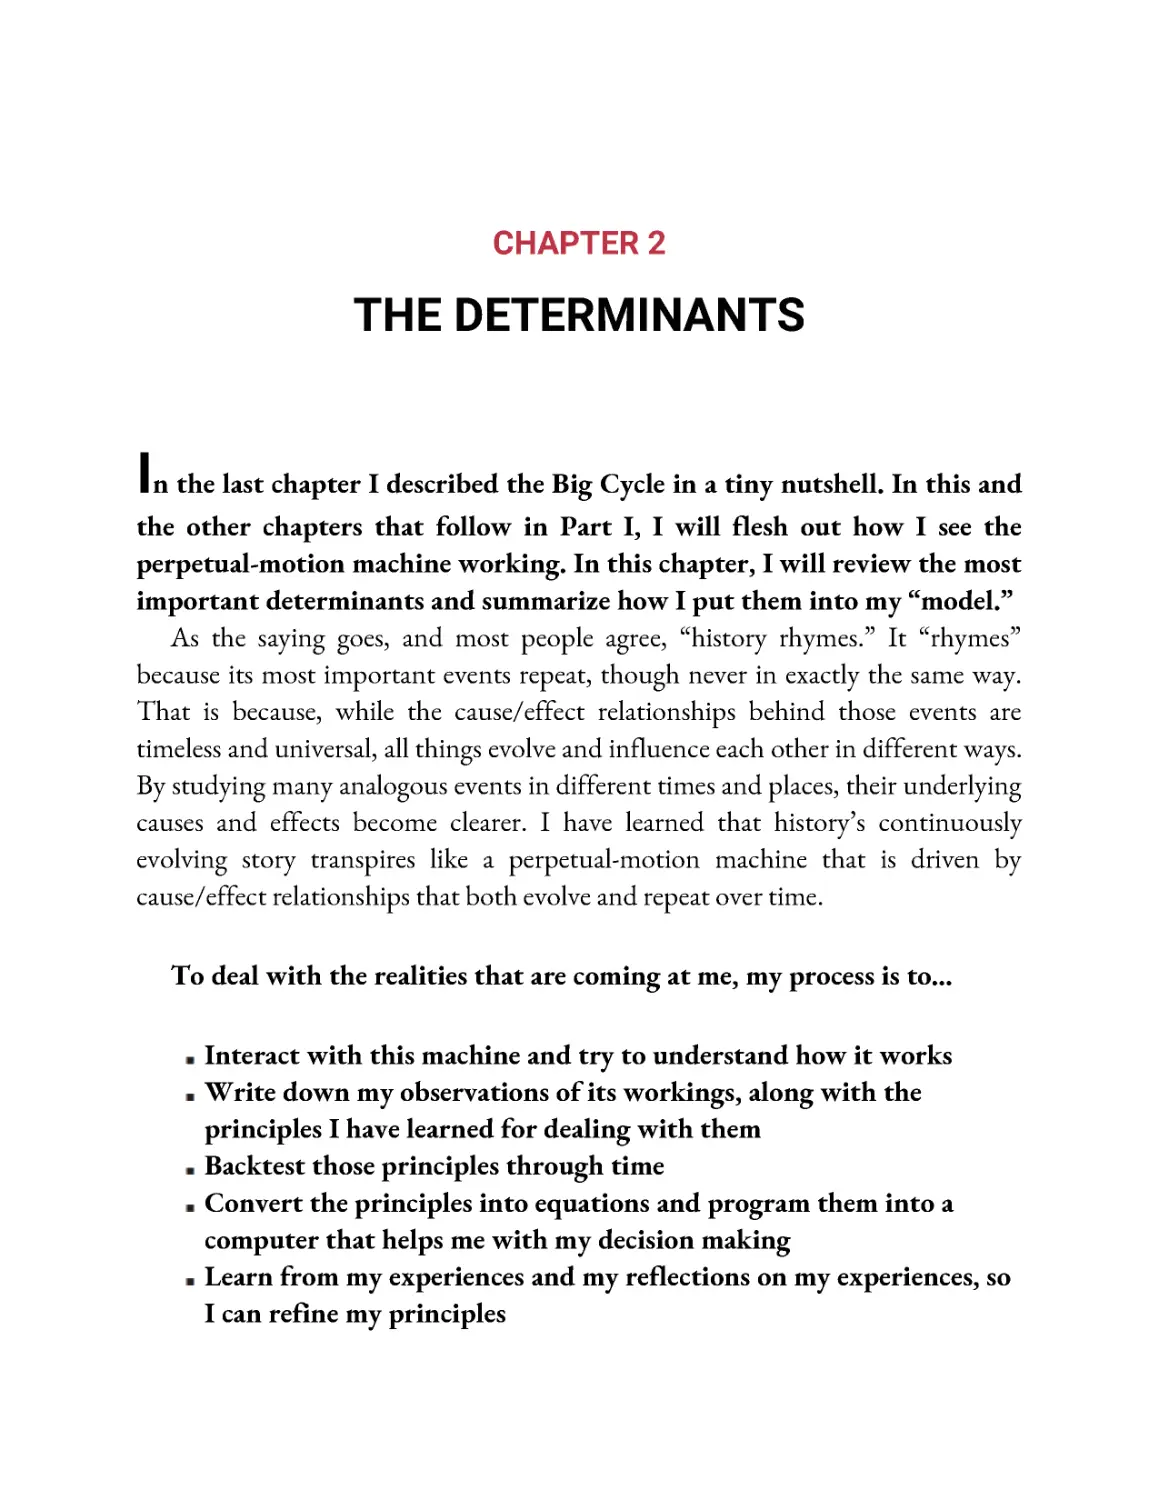 ﻿Chapter 2: The Determinant